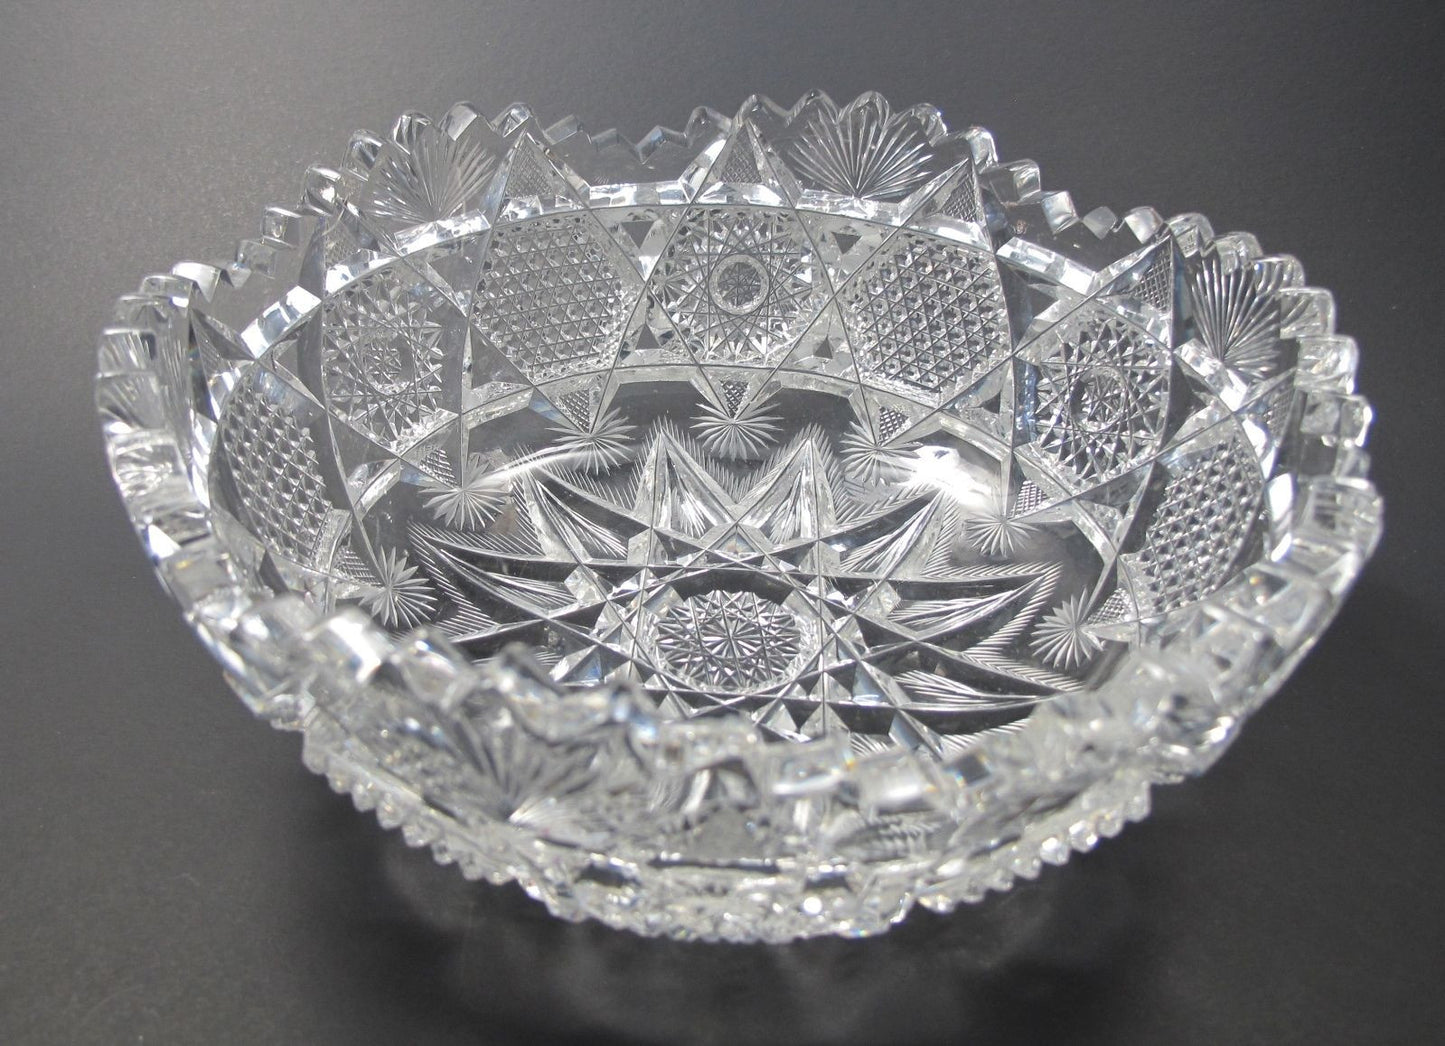 American Brilliant Period Cut Glass bowl  ABP  Antique  feathered - O'Rourke crystal awards & gifts abp cut glass